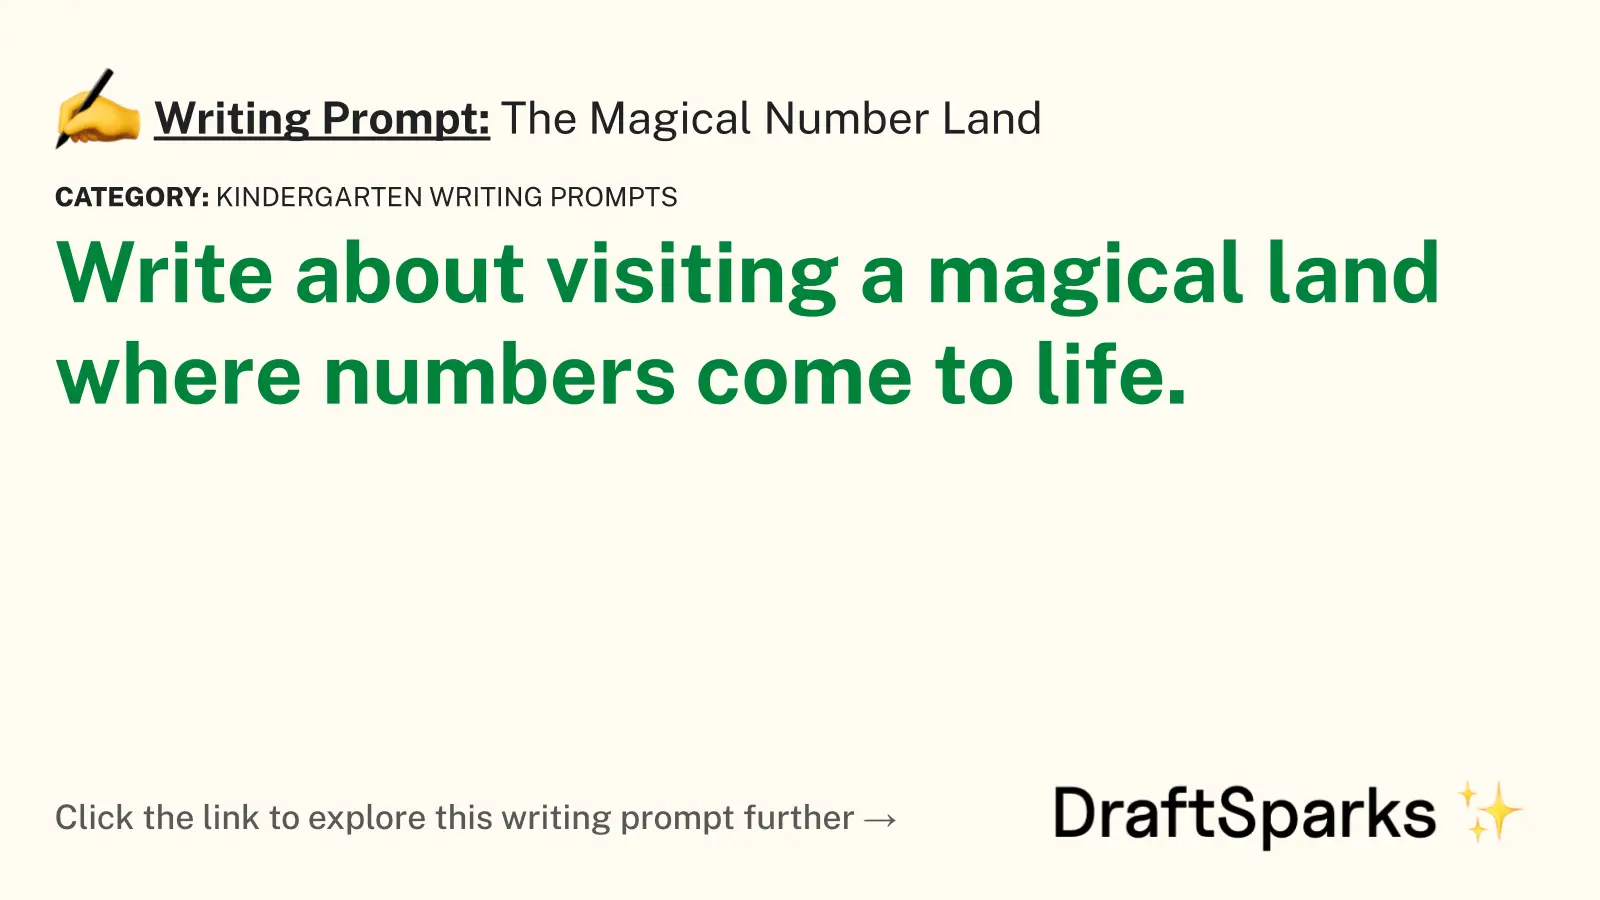 The Magical Number Land